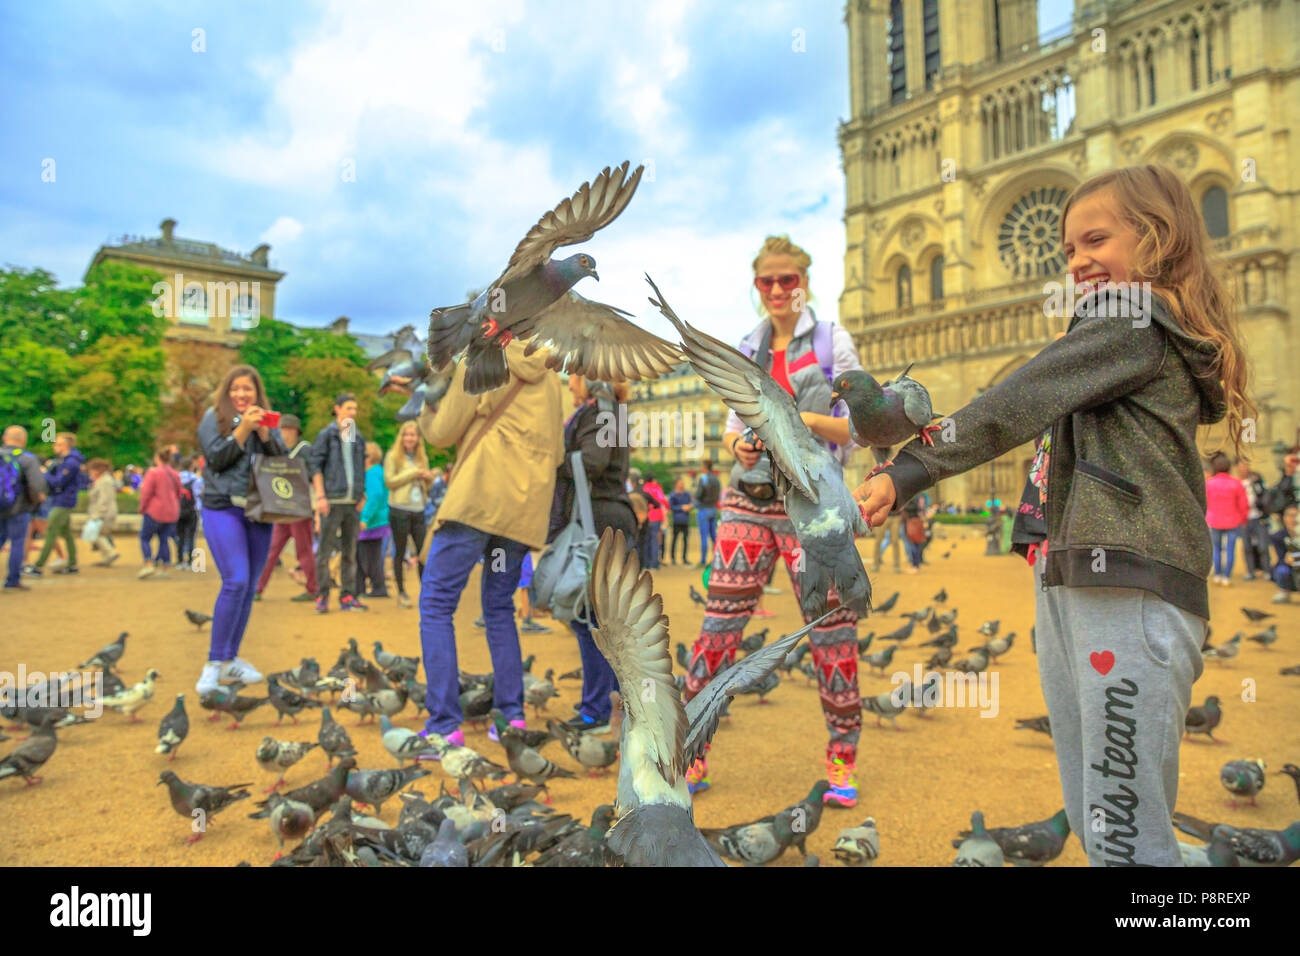 Paris, France - July 1, 2017: Happy child feeds pigeons in Notre Dame square full of people. Young tourist enjoys in Paris. Popular tourist destination in French capital. The Cathedral on background. Stock Photo